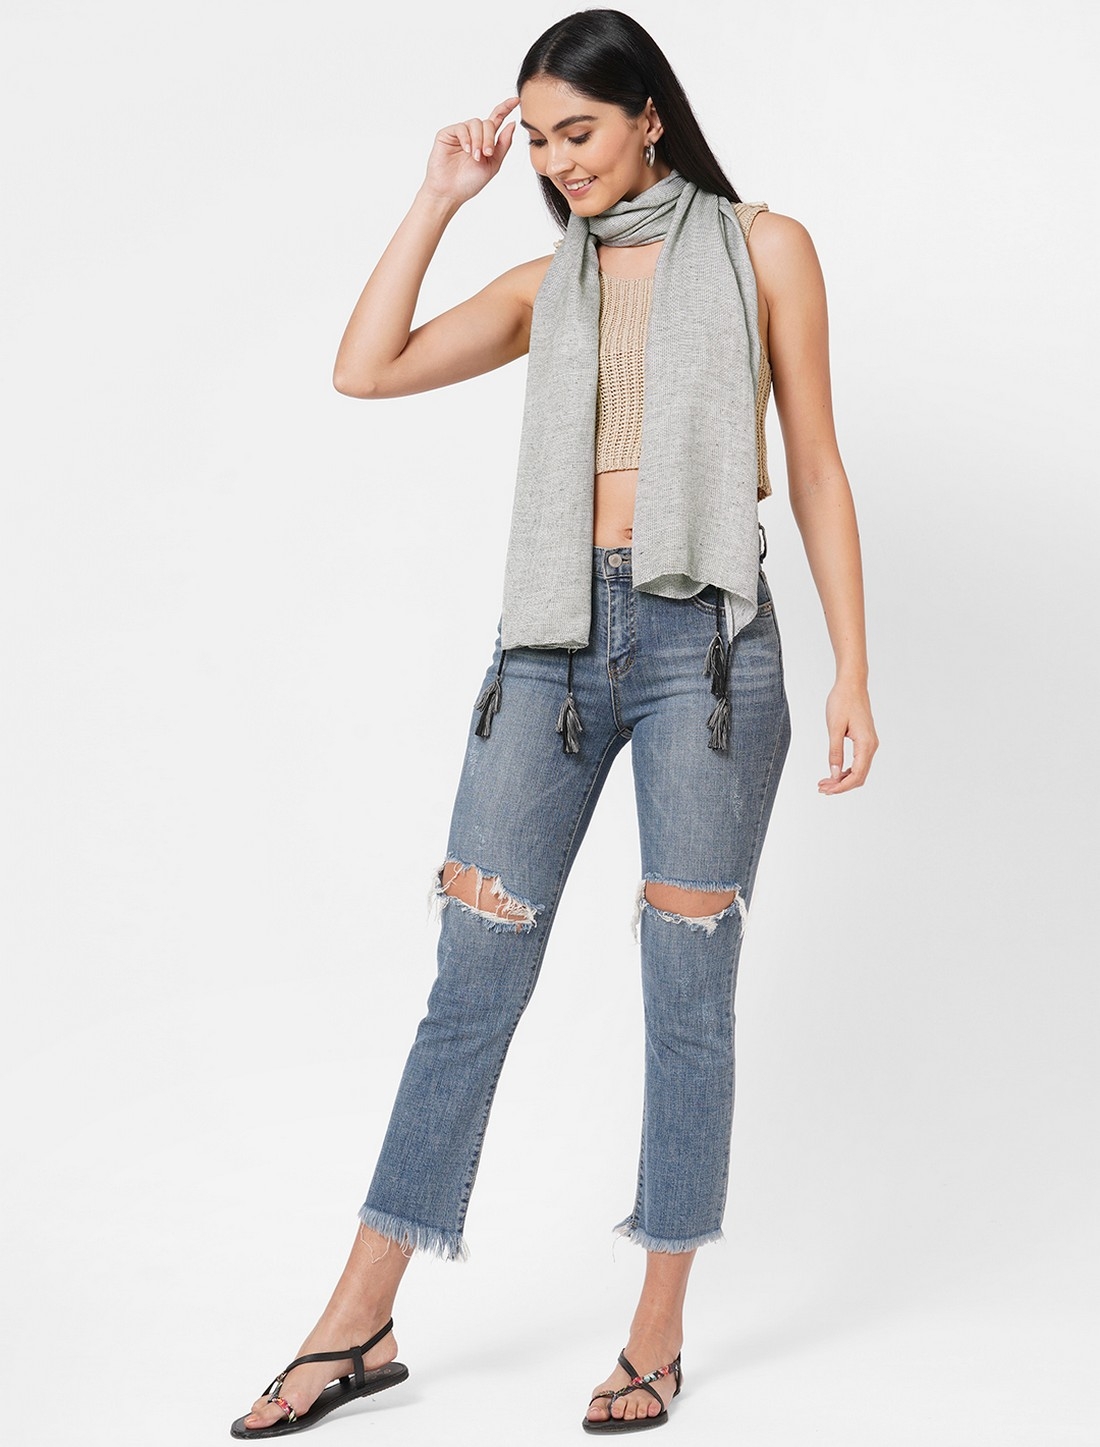 Get Wrapped | Get Wrapped Grey Dotted Scarves with Tassels 2